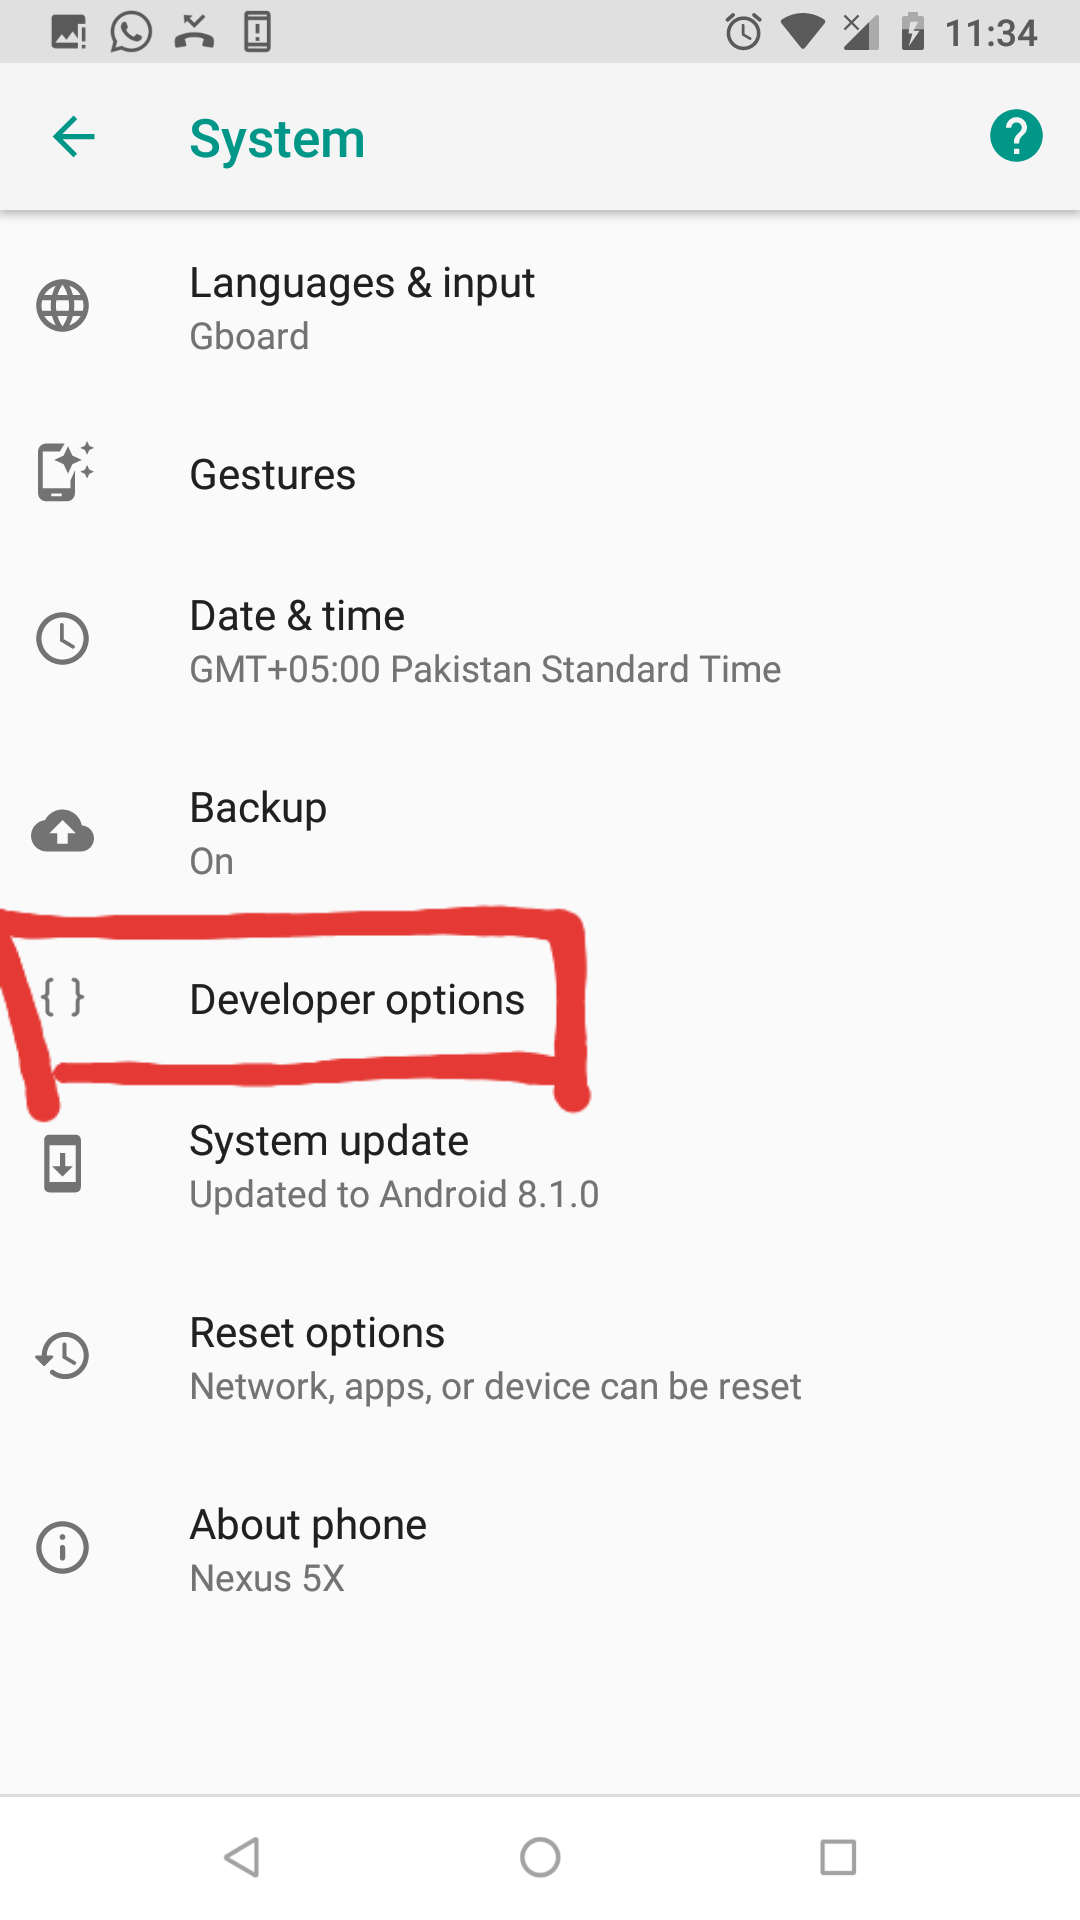 Cara Mengaktifkan Opsi Pengembang untuk Proyek Android Studio "width =" 1080 "height =" 1920 "srcset =" https://krispitech.com/wp-content/uploads/2020/02/How-to-turn-on- developer-options-for-android-studio-project-5.png 1080w, https://krispitech.com/wp-content/uploads/2020/02/How-to-turn-on-developer-options-for-android -studio-project-5-169x300.png 169w, https://krispitech.com/wp-content/uploads/2020/02/How-to-turn-on-developer-options-for-android-studio-project- 5-768x1365.png 768w, https://krispitech.com/wp-content/uploads/2020/02/How-to-turn-on-developer-options-for-android-studio-project-5-576761010.png 576w, https://krispitech.com/wp-content/uploads/2020/02/How-to-turn-on-developer-options-for-android-studio-project-5-696x1237.png 696w, https: / /krispitech.com/wp-content/uploads/2020/02/How-to-turn-on-developer-options-for-android-studio-project-5-1068x1899.png 1068w, https://krispitech.com/ wp-content / uploads / 2020/02 / Bagaimana-untuk-mengaktifkan-pengembang-opsi-untuk-android-studio-project-5-236x420.png 236w "size =" (max-width: 1080px) 100vw, 1080px